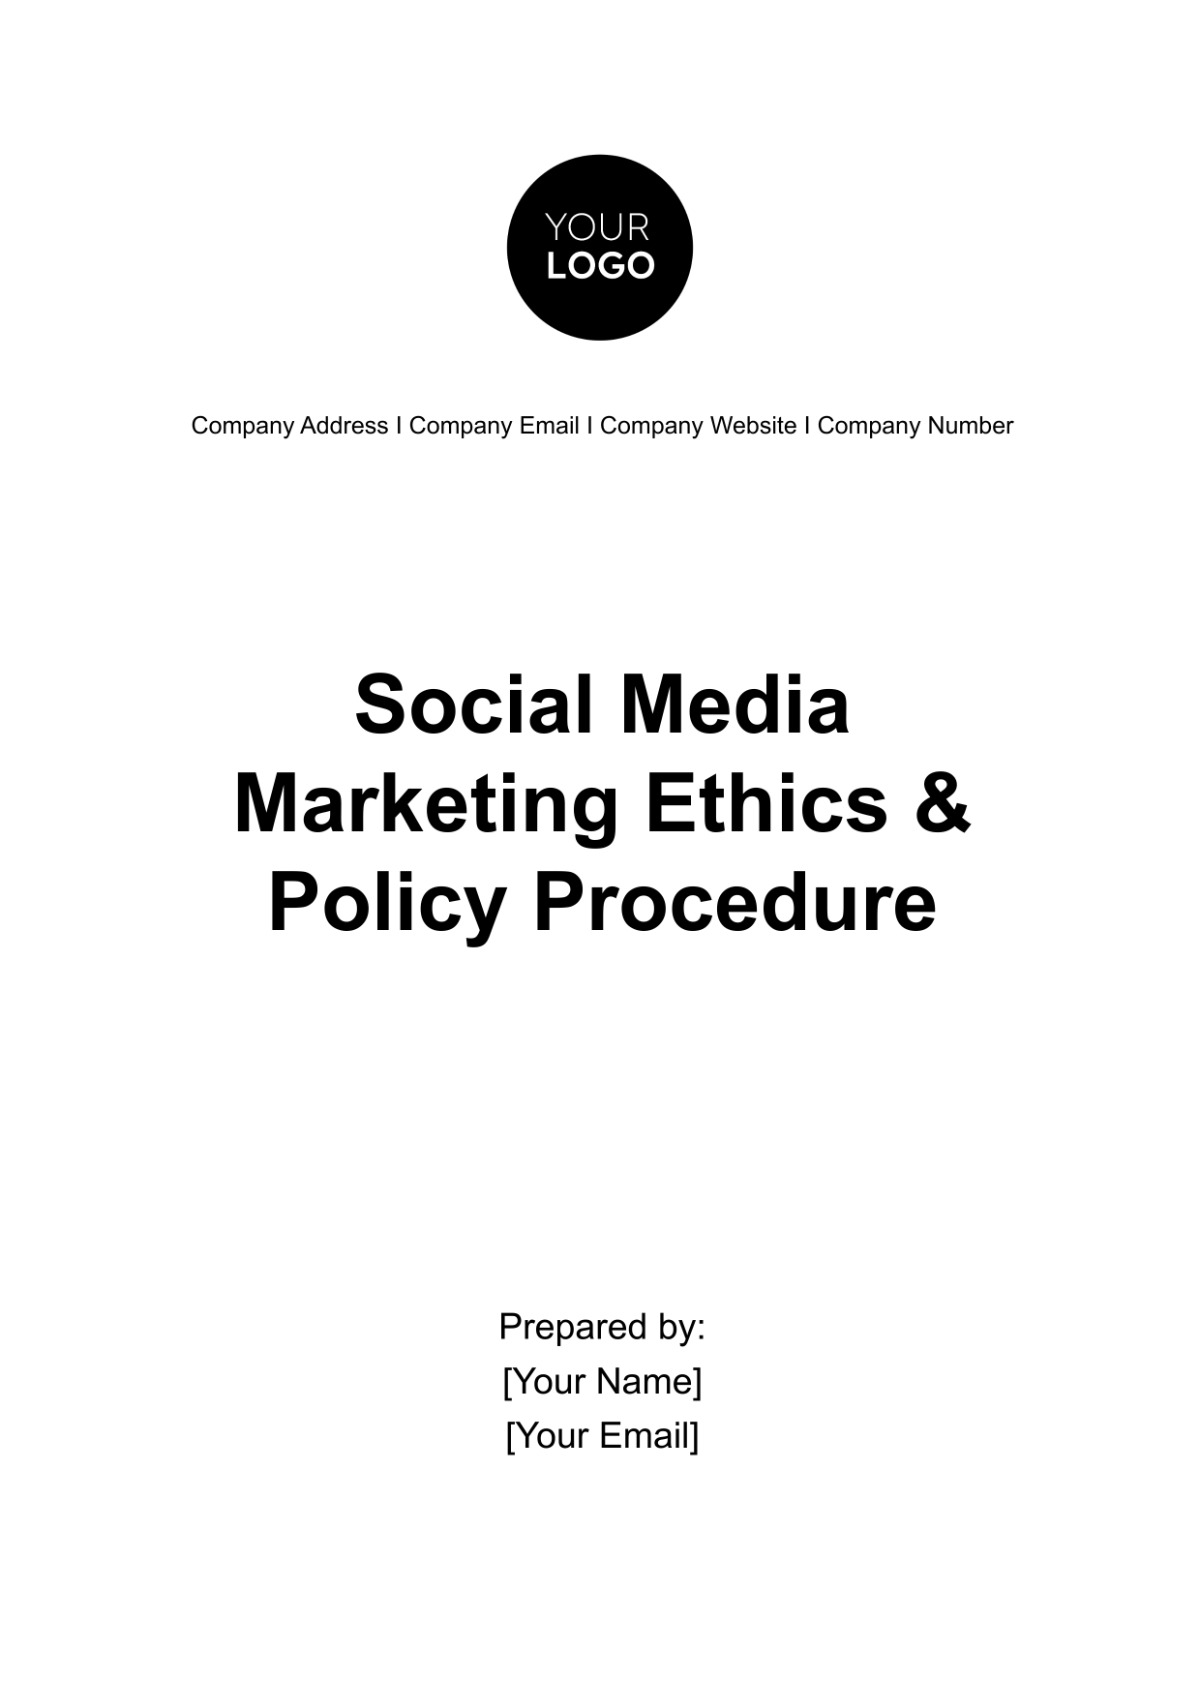 Free Social Media Marketing Ethics & Policy Procedure Template